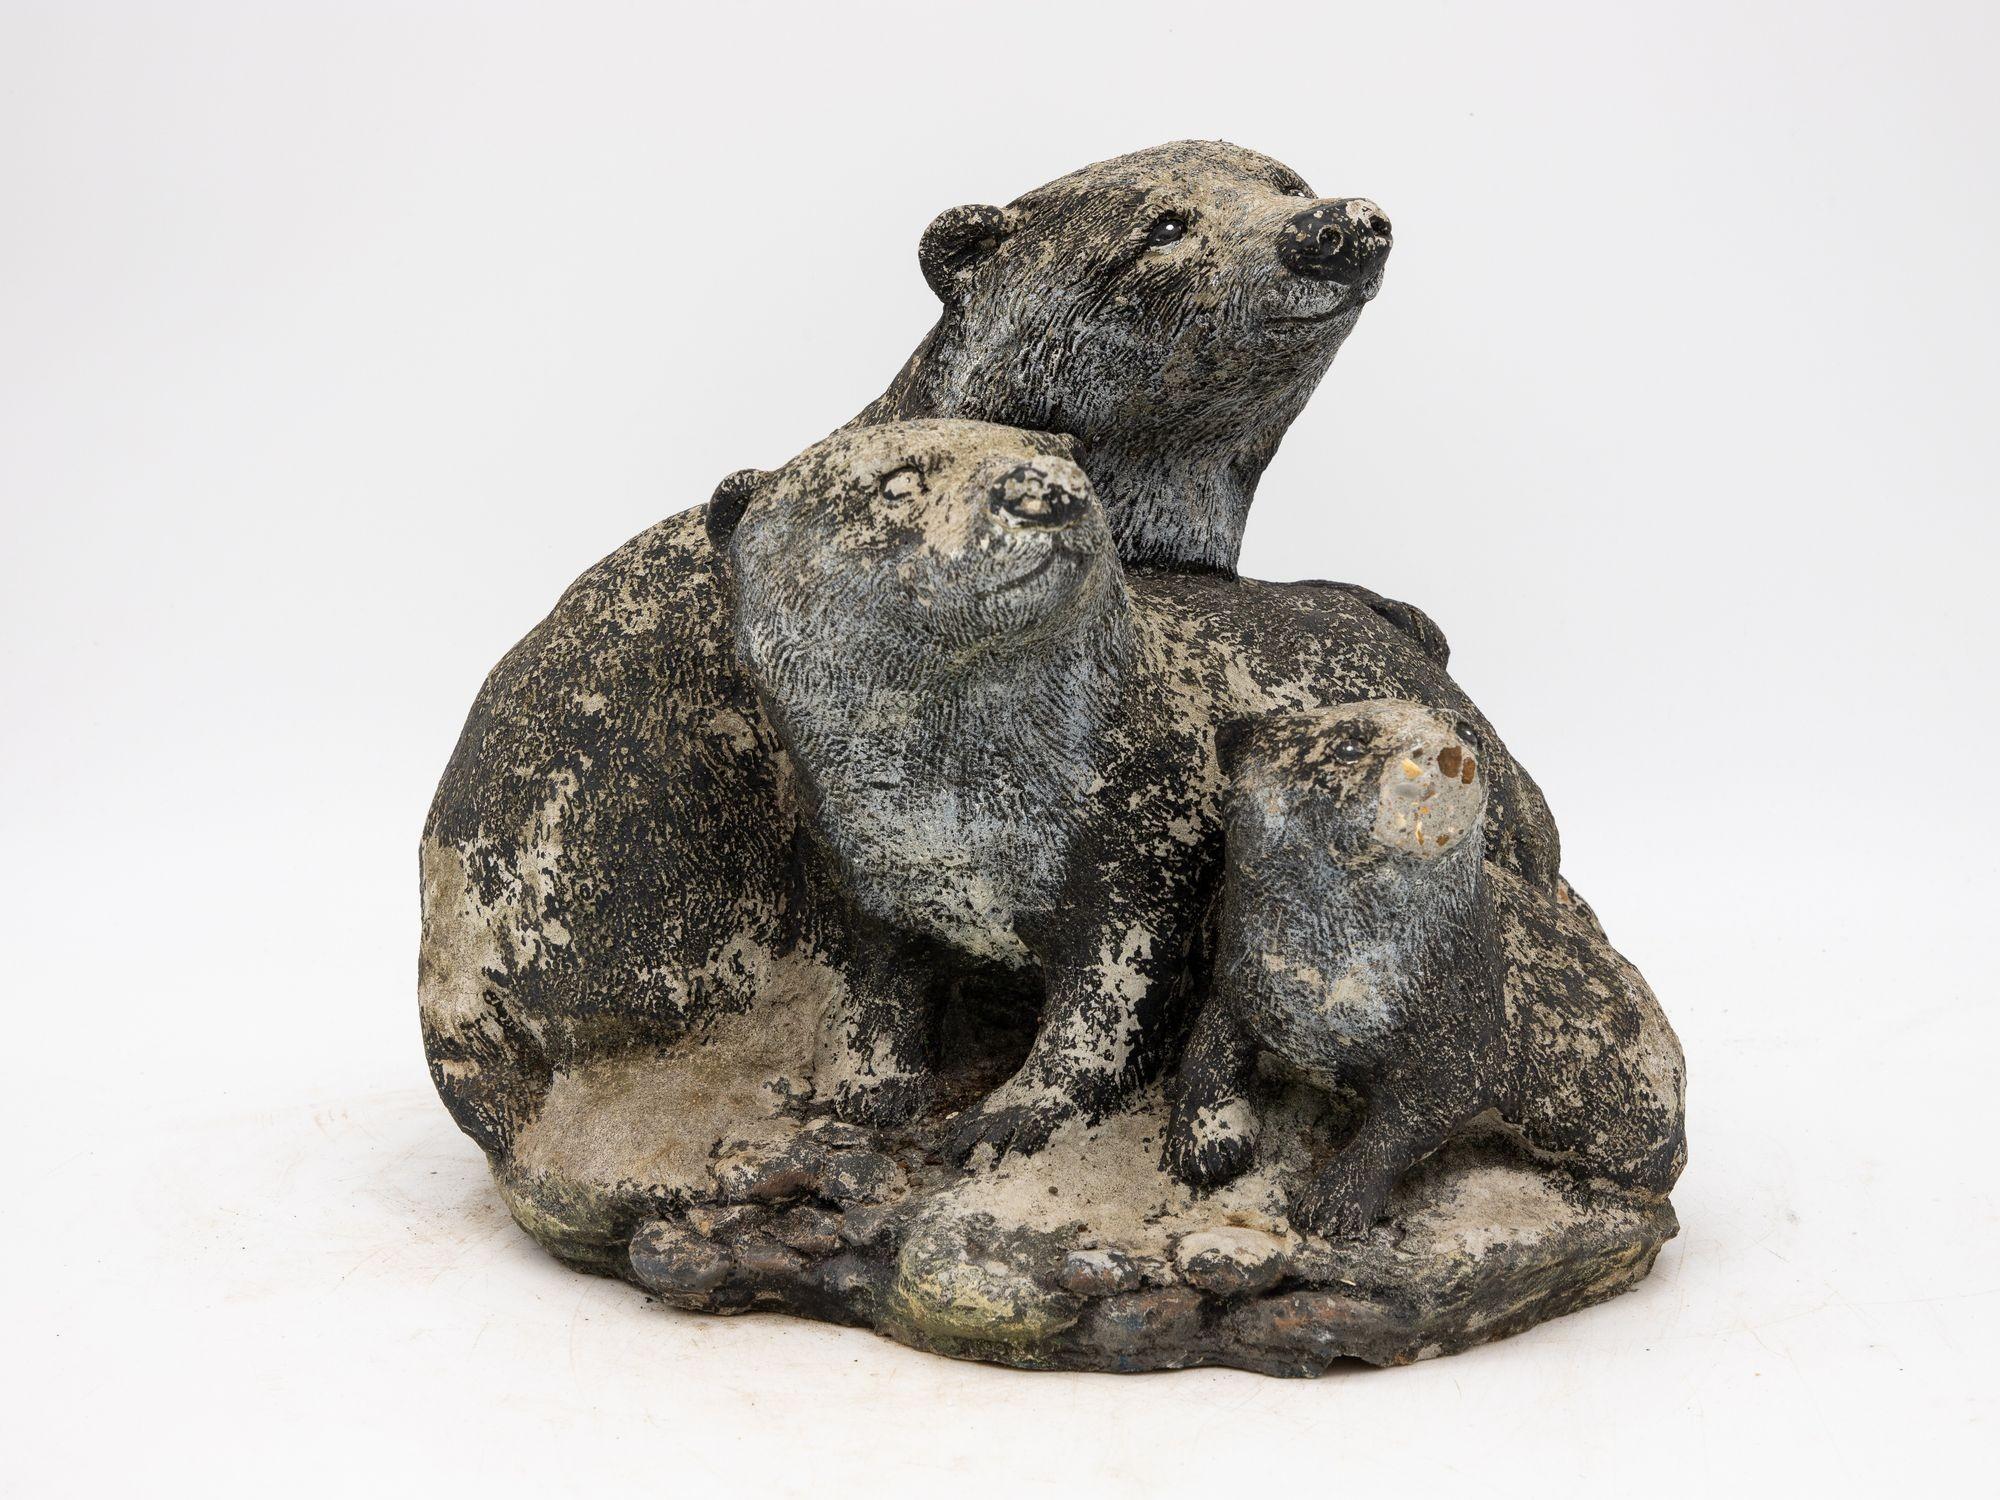 This mid-20th century Belgian garden ornament is a charming piece of artistry, showcasing three beautifully crafted badgers in varying sizes. Nestled on a bed of realistic rocks, these lifelike badgers exhibit exquisite attention to detail,